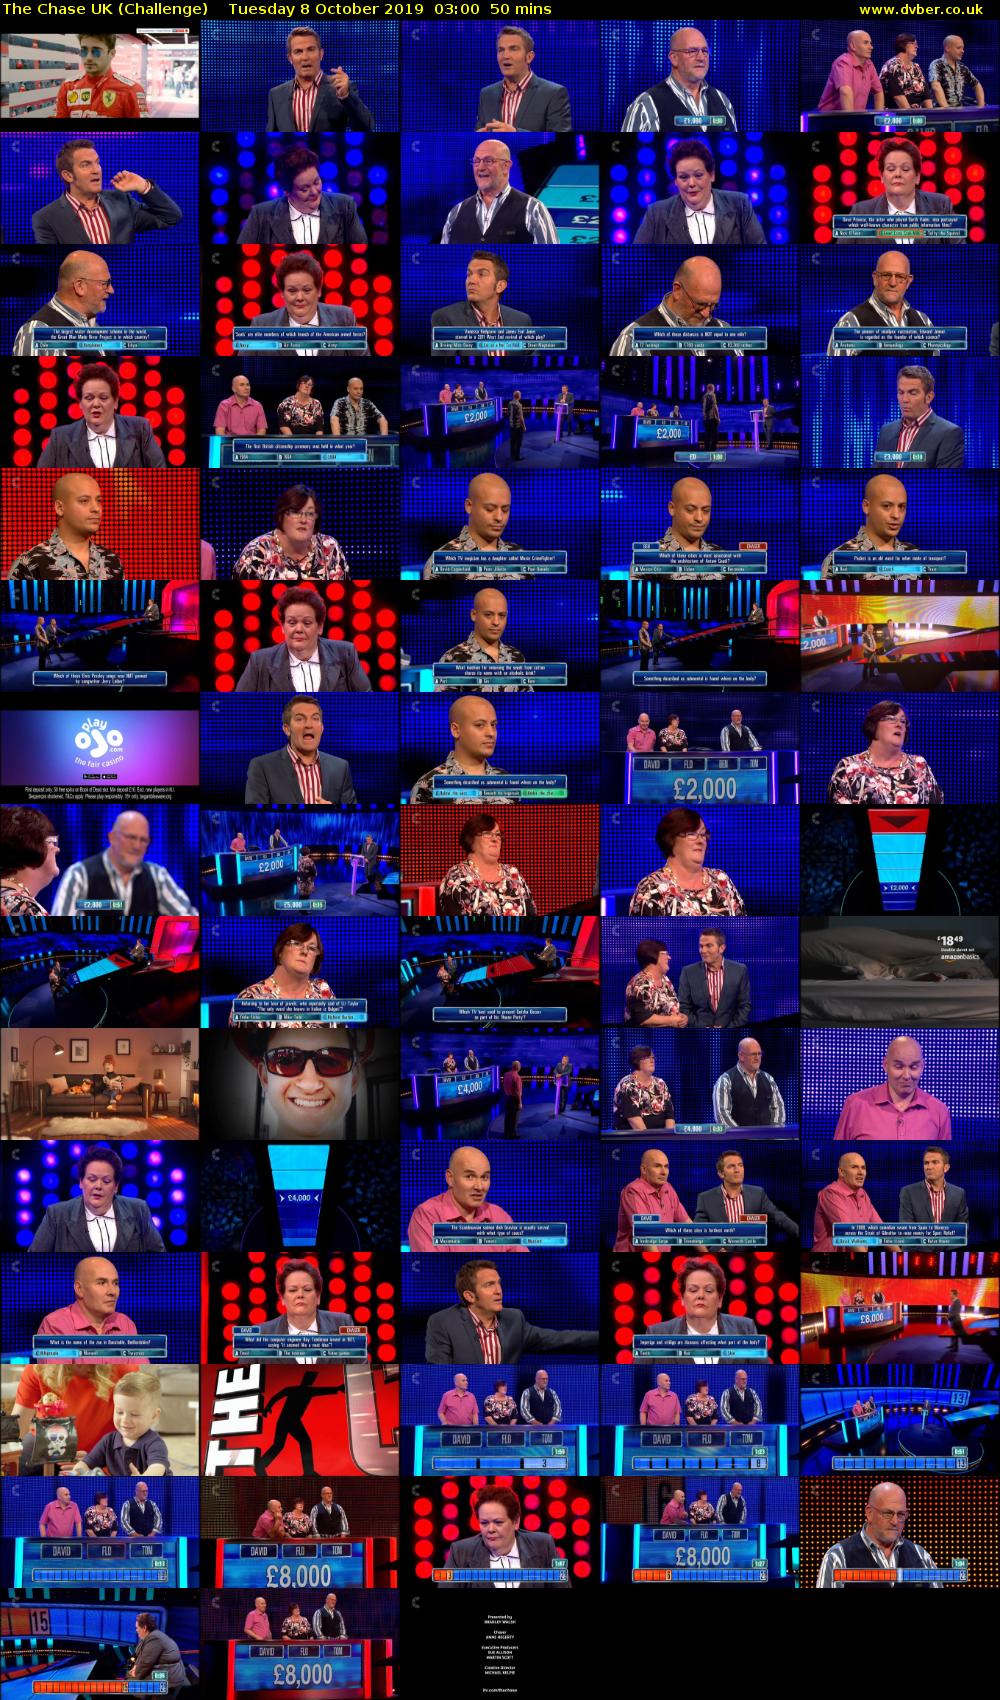 The Chase UK (Challenge) Tuesday 8 October 2019 03:00 - 03:50